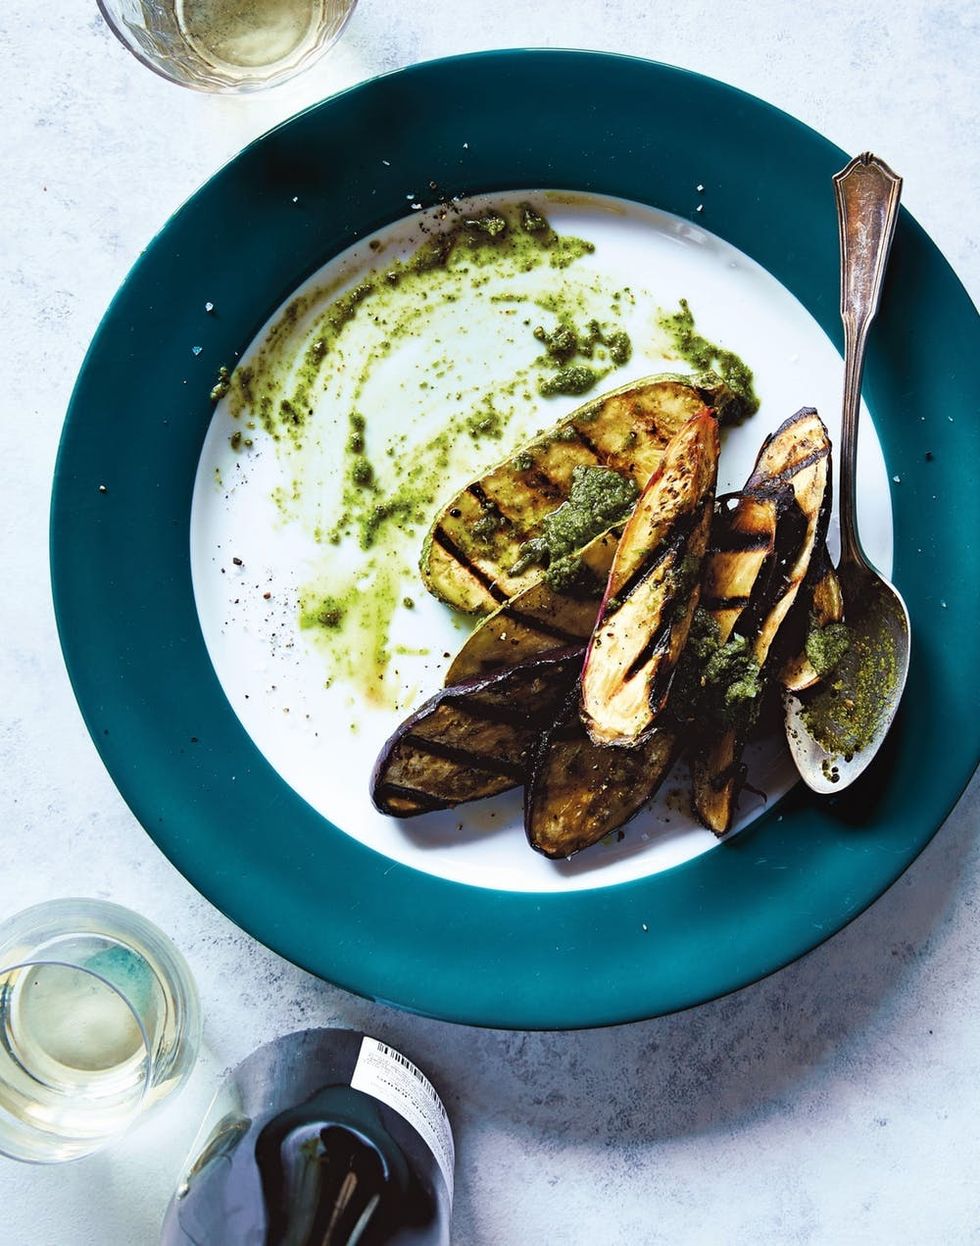 Danielle & Laura Kosann's Grilled Eggplant and Zucchini with Smoked Almond-Cilantro Pesto is simple enough for summer weeknights and the pesto can be made ahead.